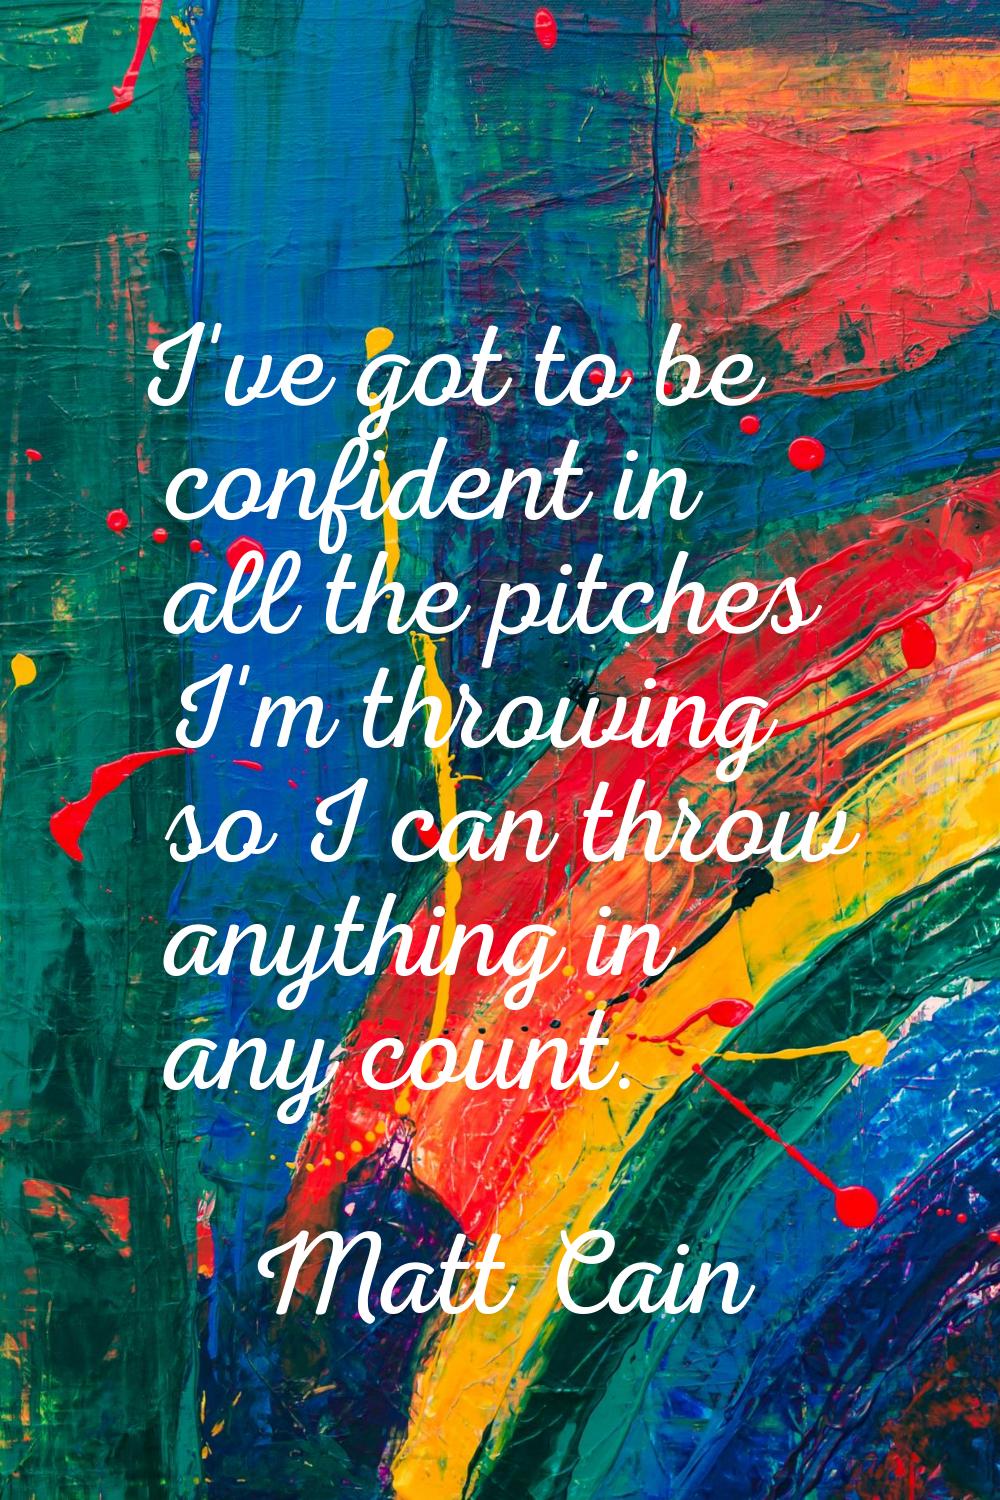 I've got to be confident in all the pitches I'm throwing so I can throw anything in any count.